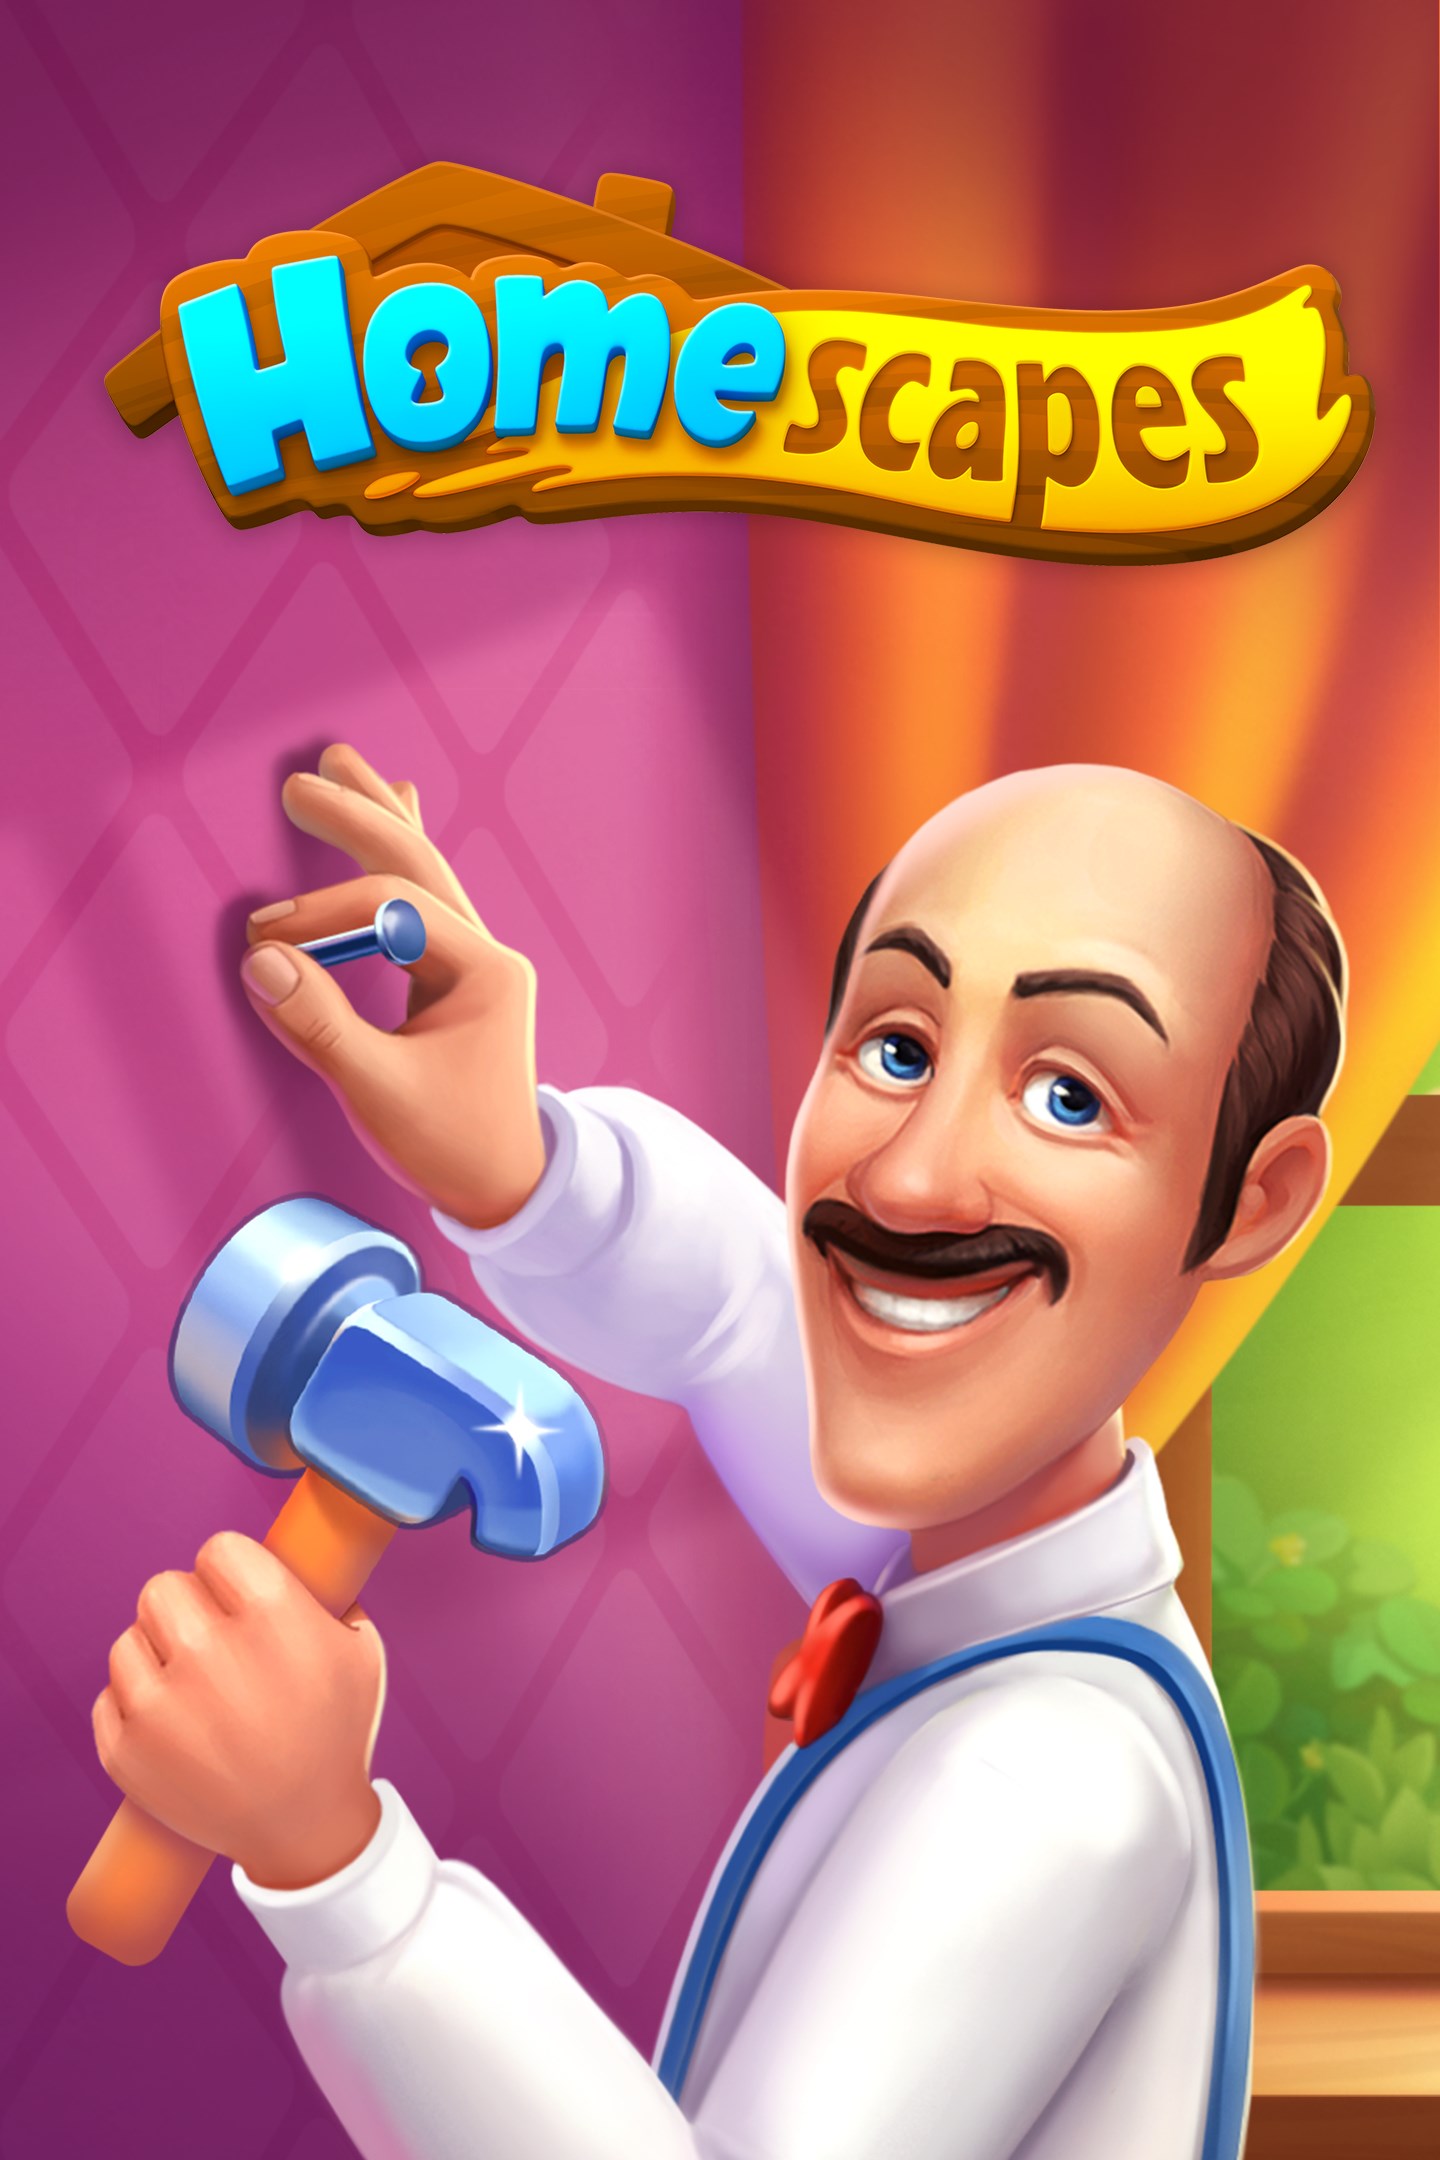 homescapes game wiki